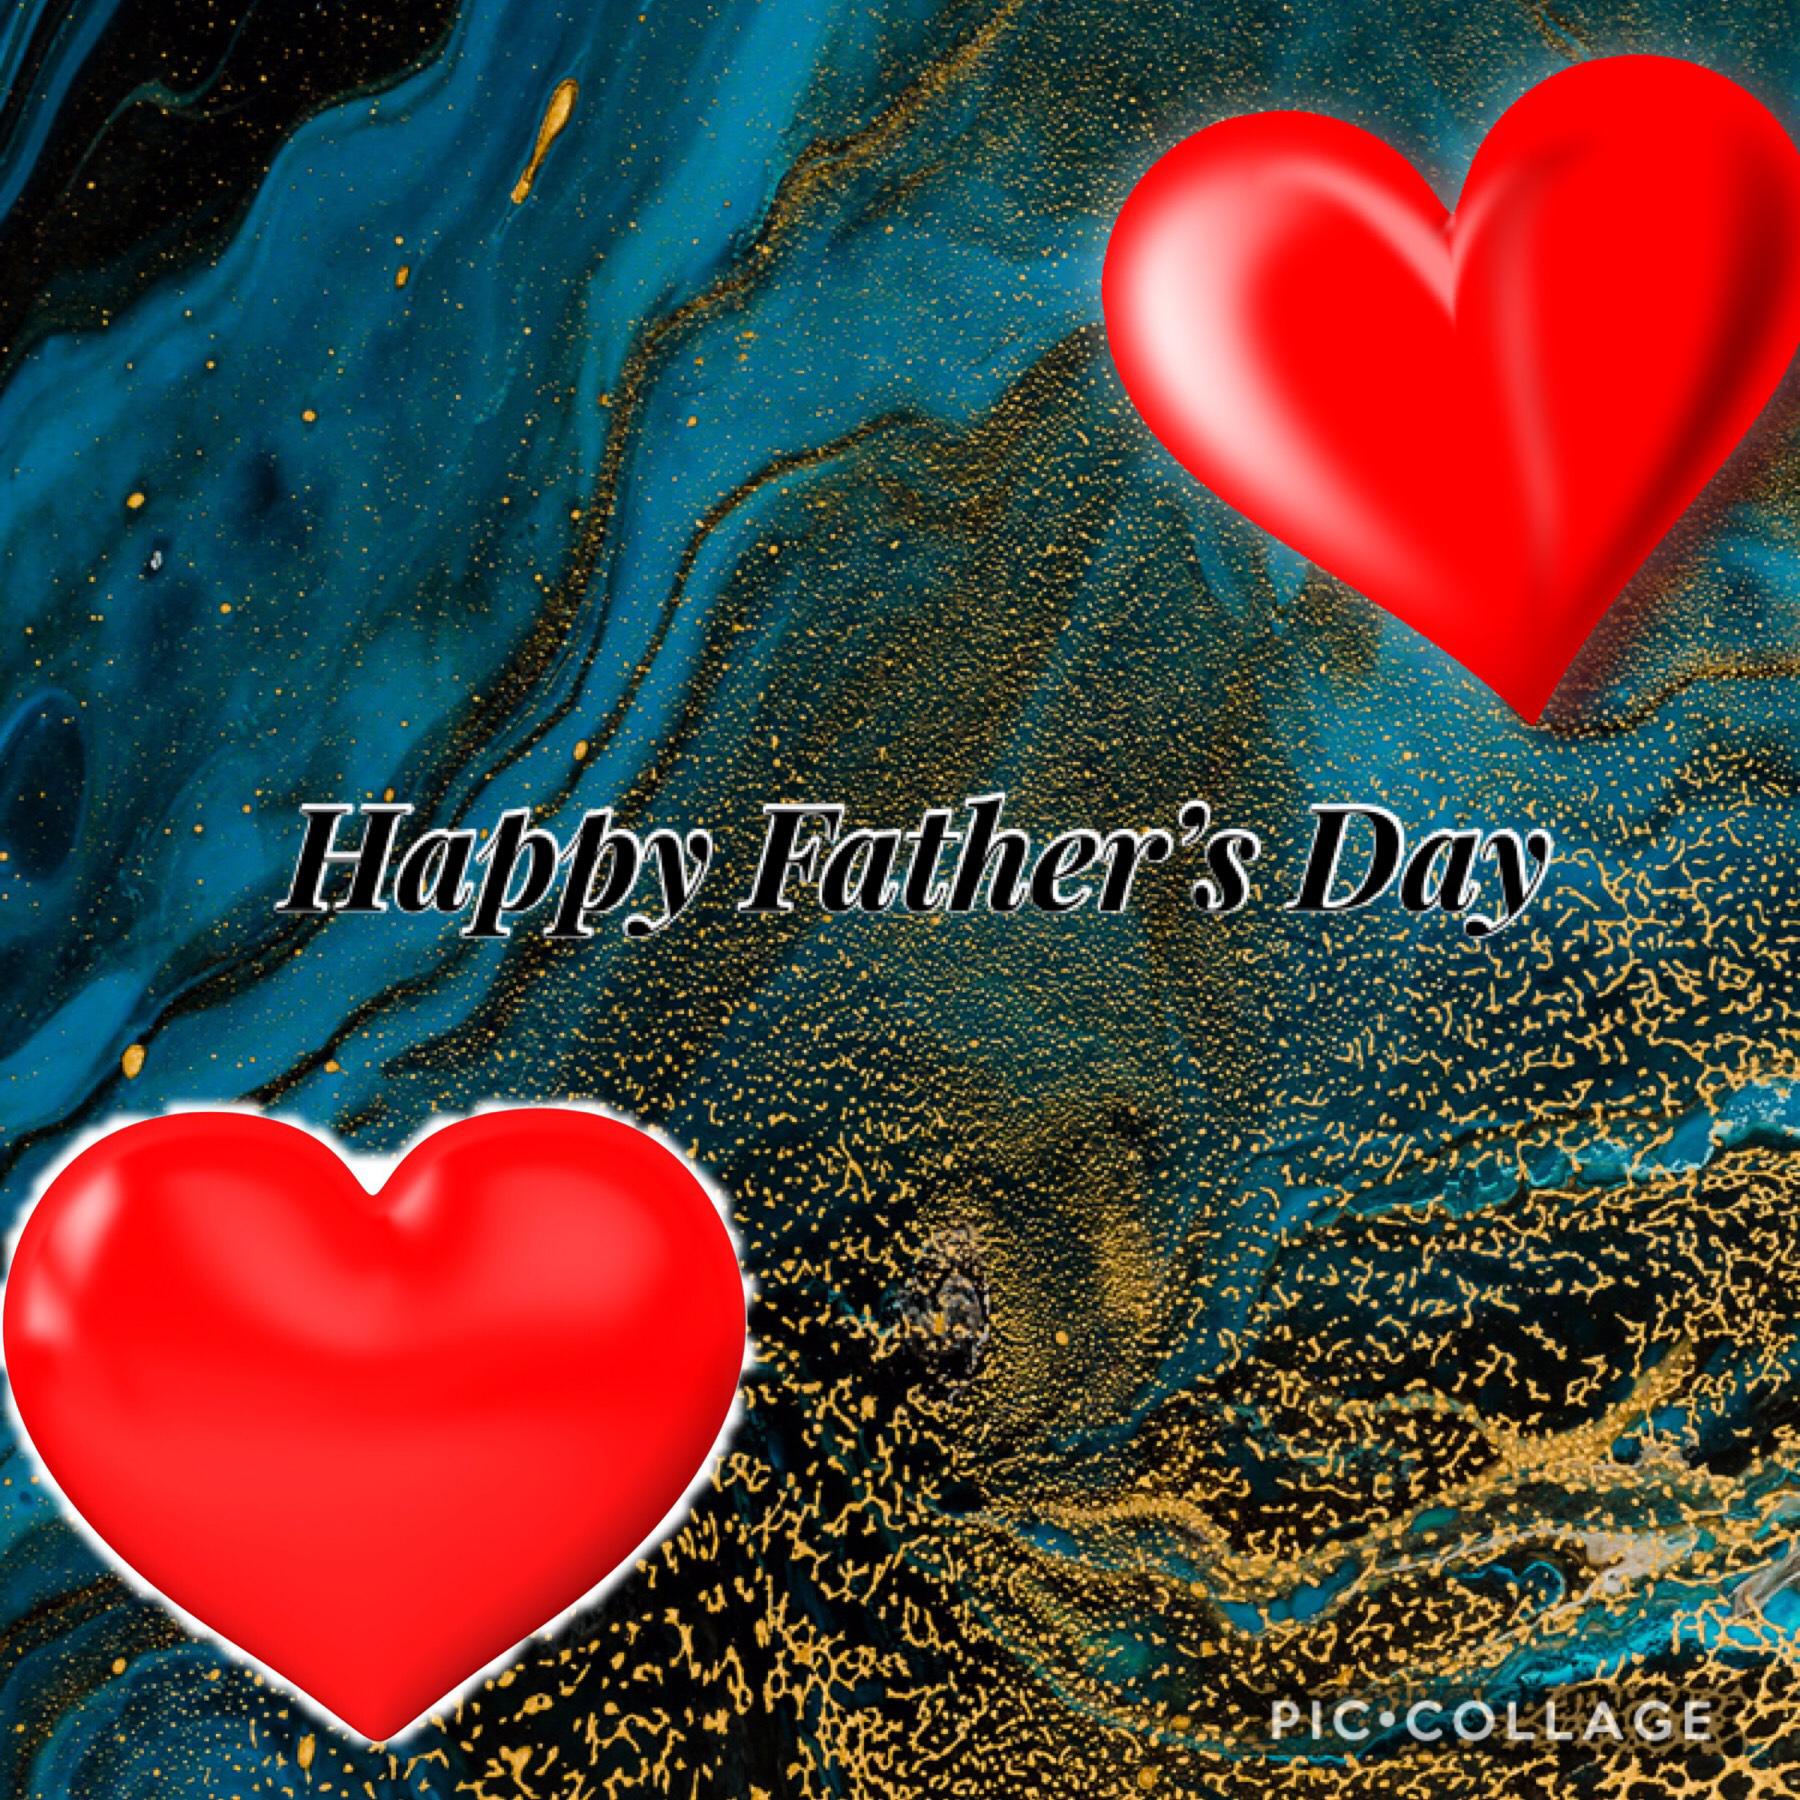 Happy Father’s Day to all dads out there